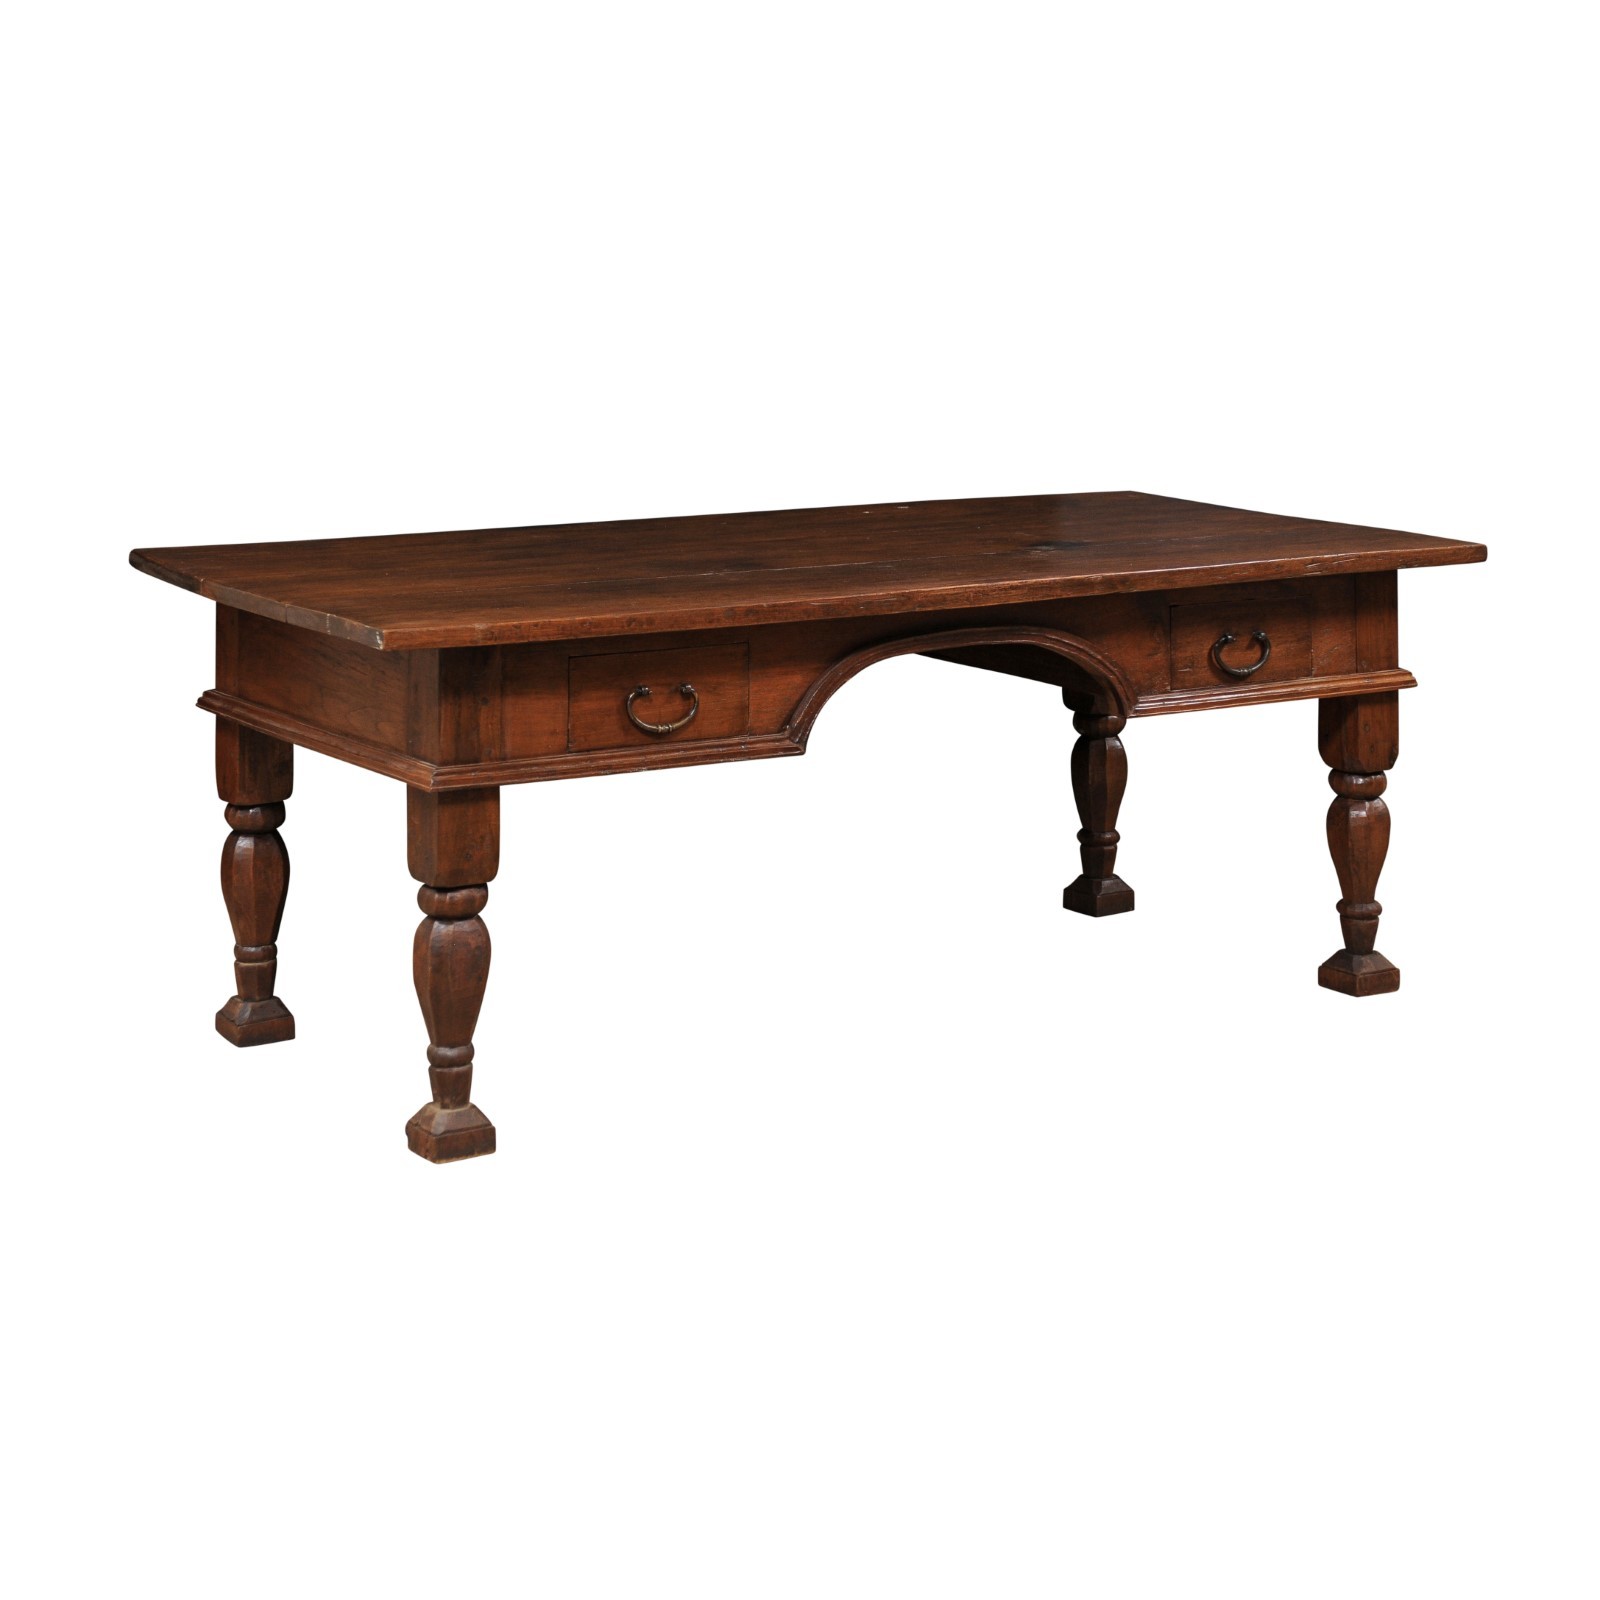 Generous-Size Desk w/ Baluster Carved Legs